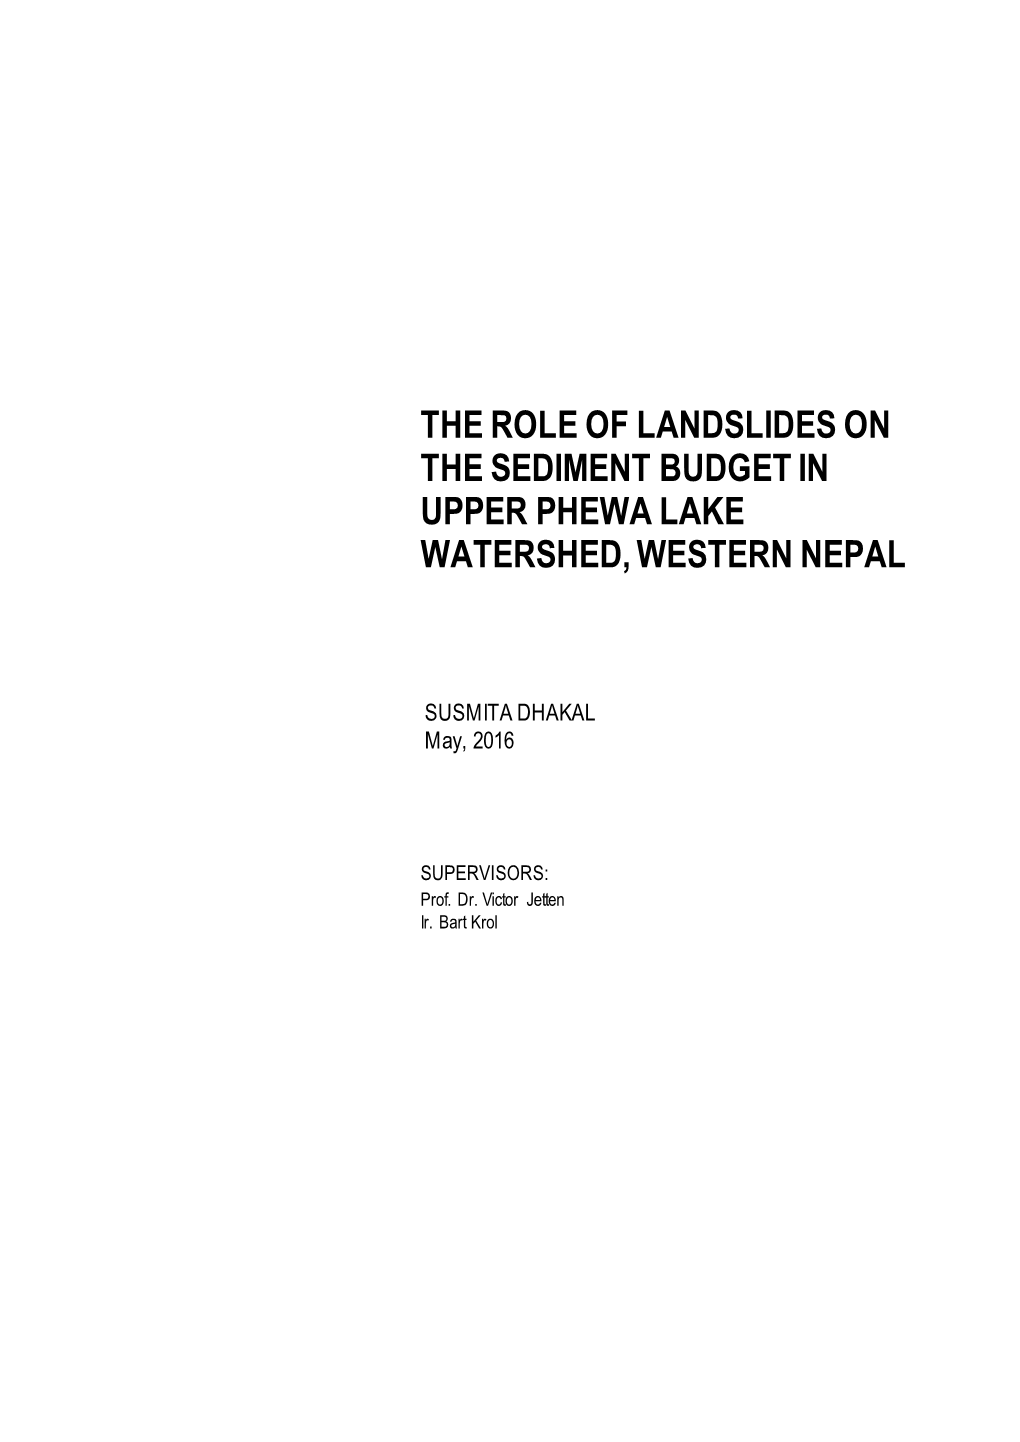 The Role of Landslides on the Sediment Budget in Upper Phewa Lake Watershed, Western Nepal